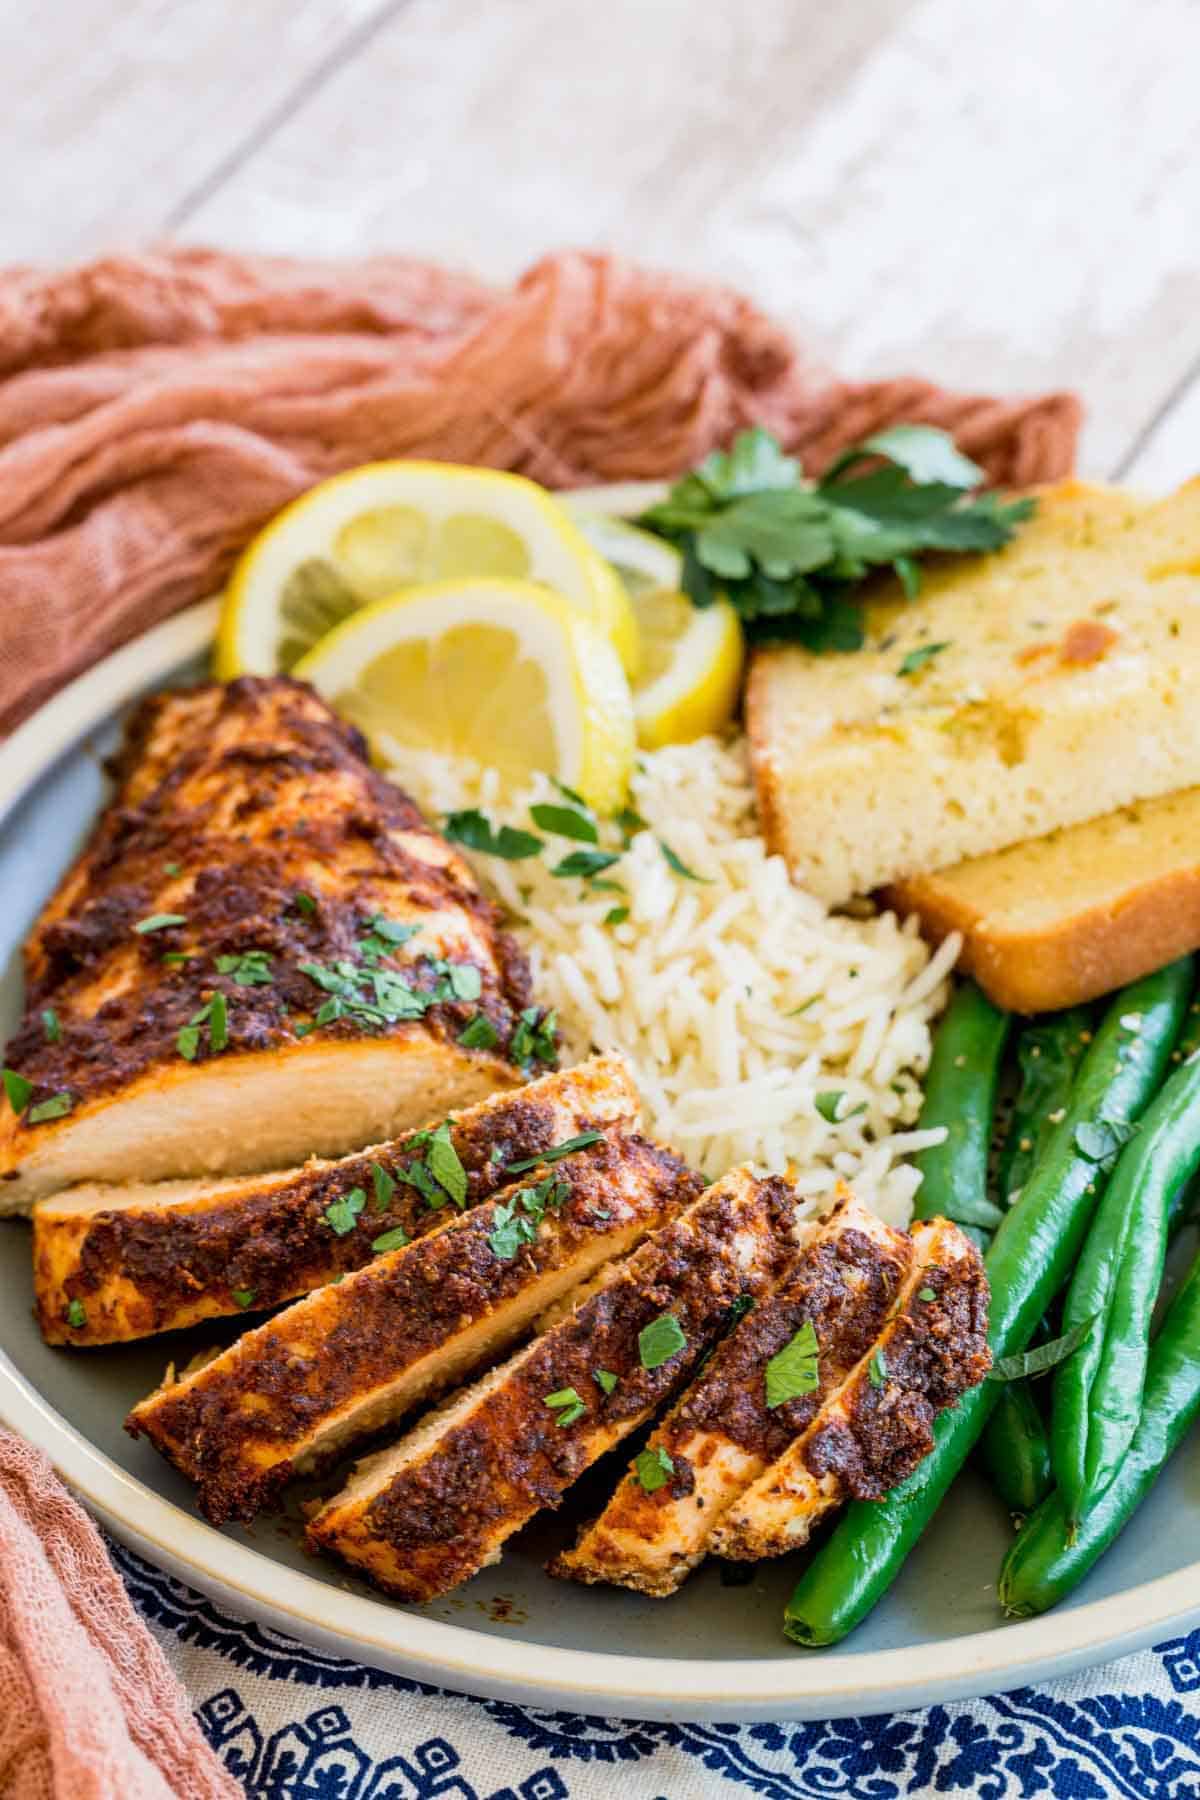 Juicy blackened chicken slices on a plate with green beans, rice, and toast slices.